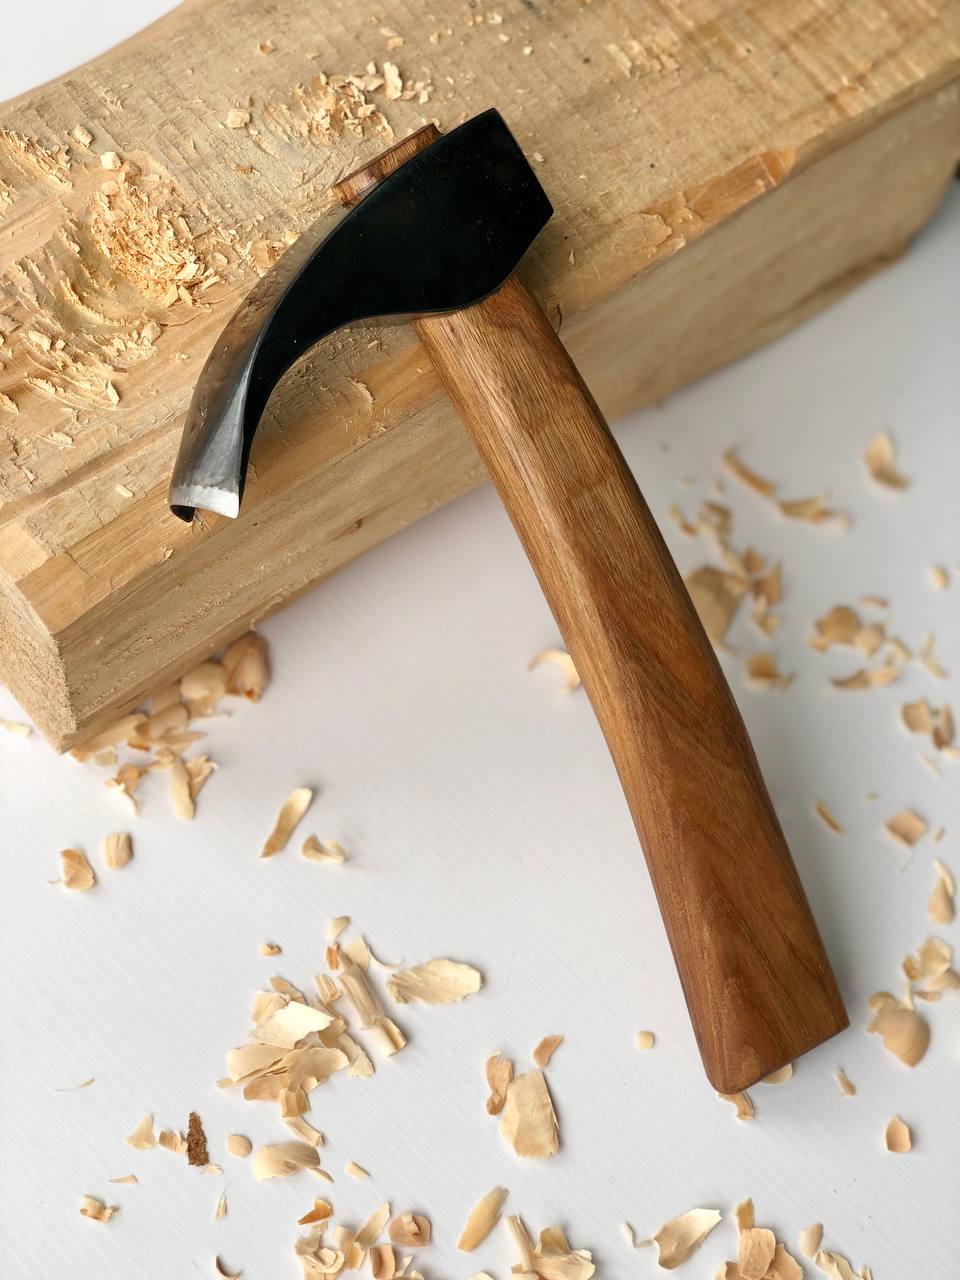 Adze: a Tool For Working Wood